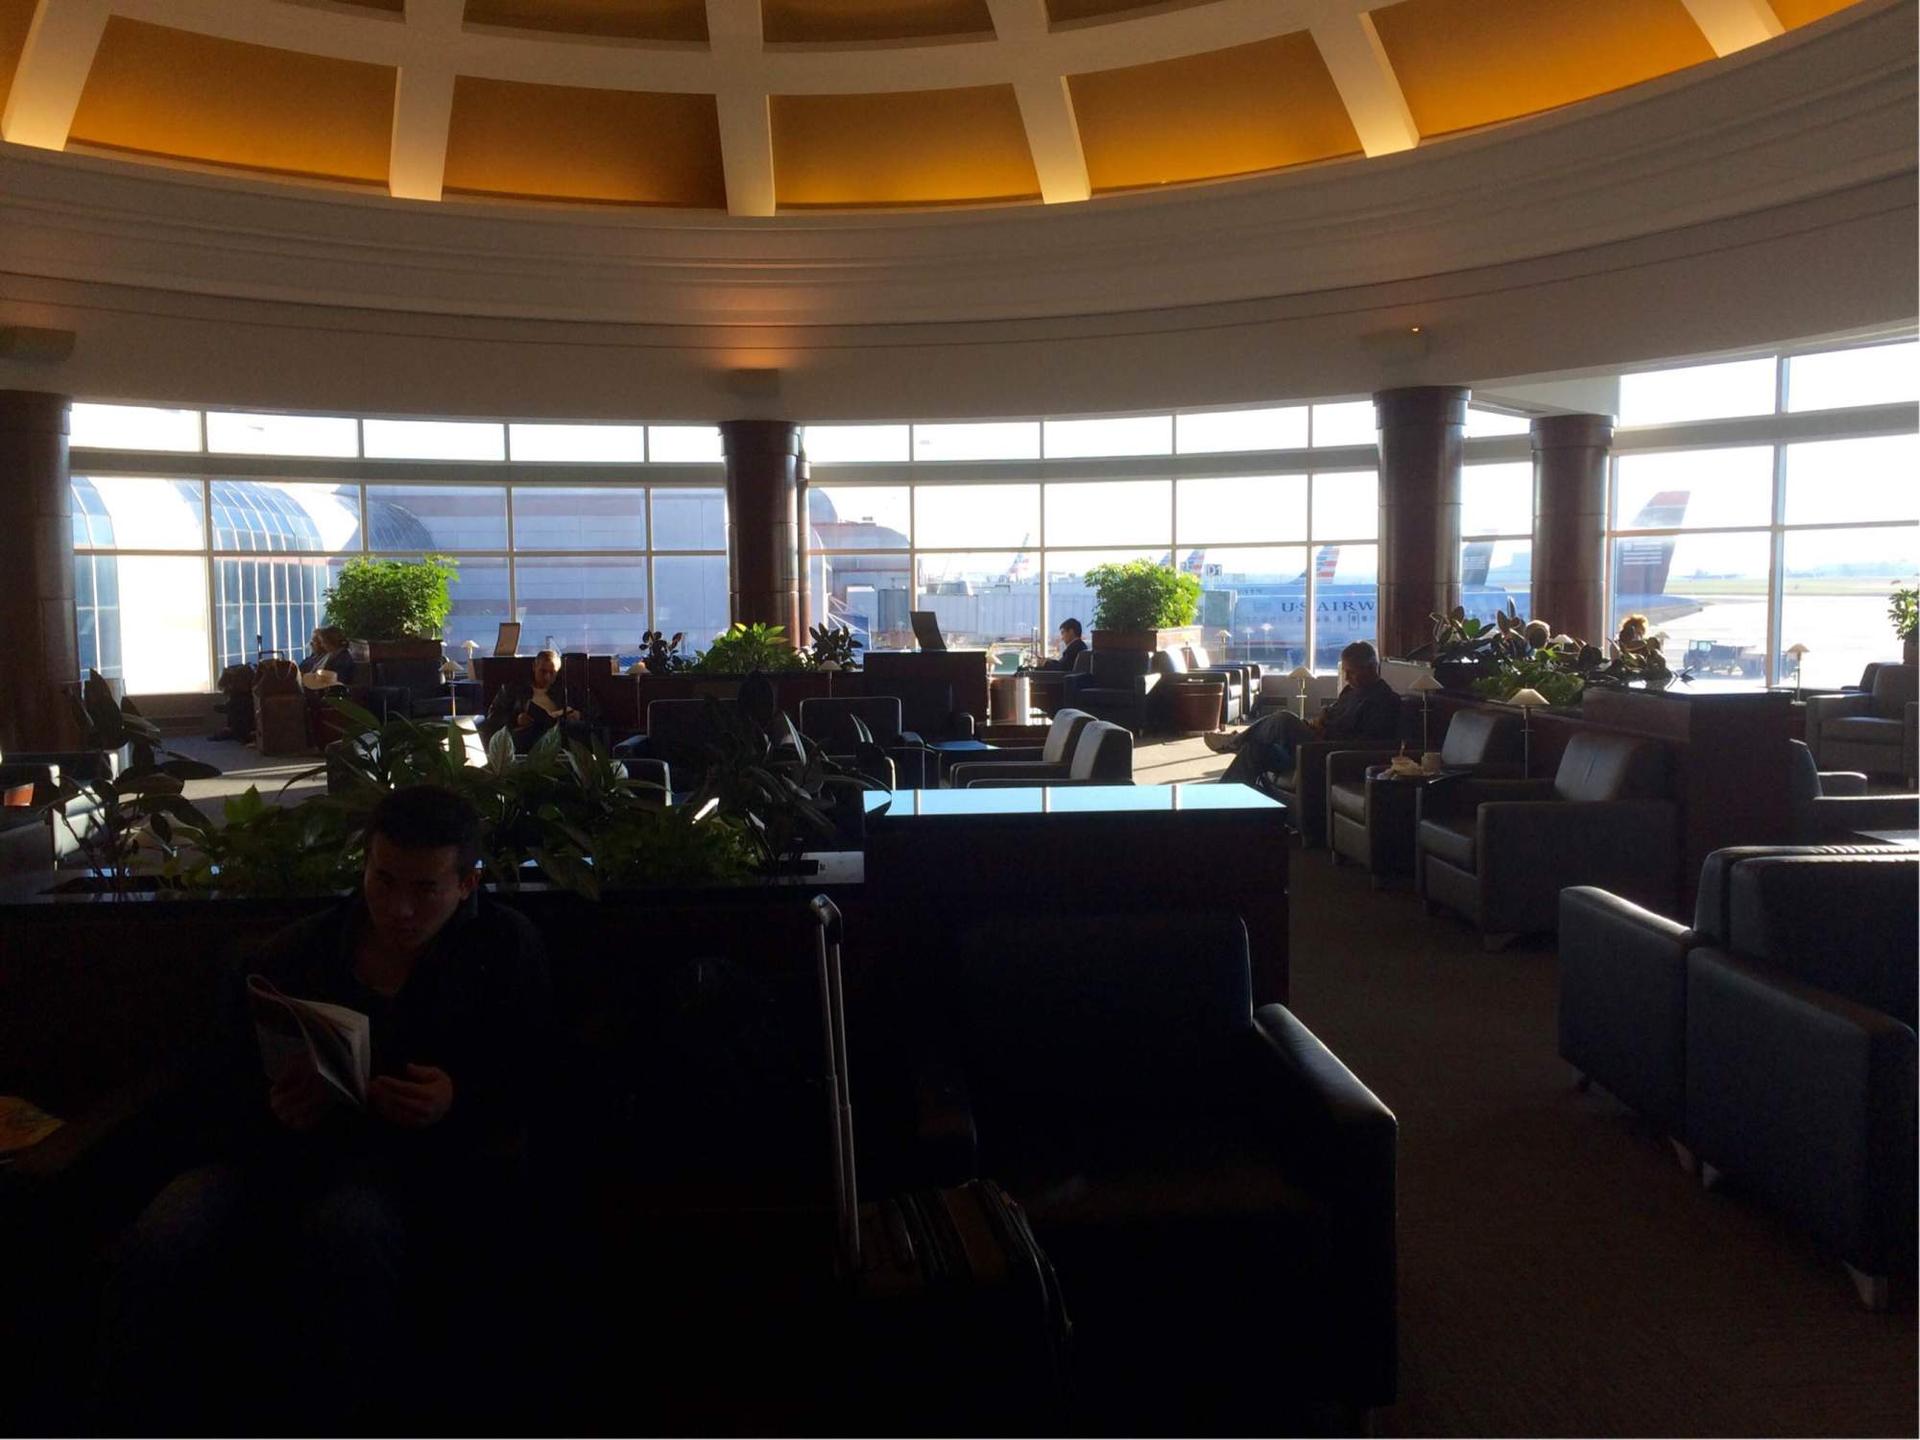 American Airlines Admirals Club image 20 of 37